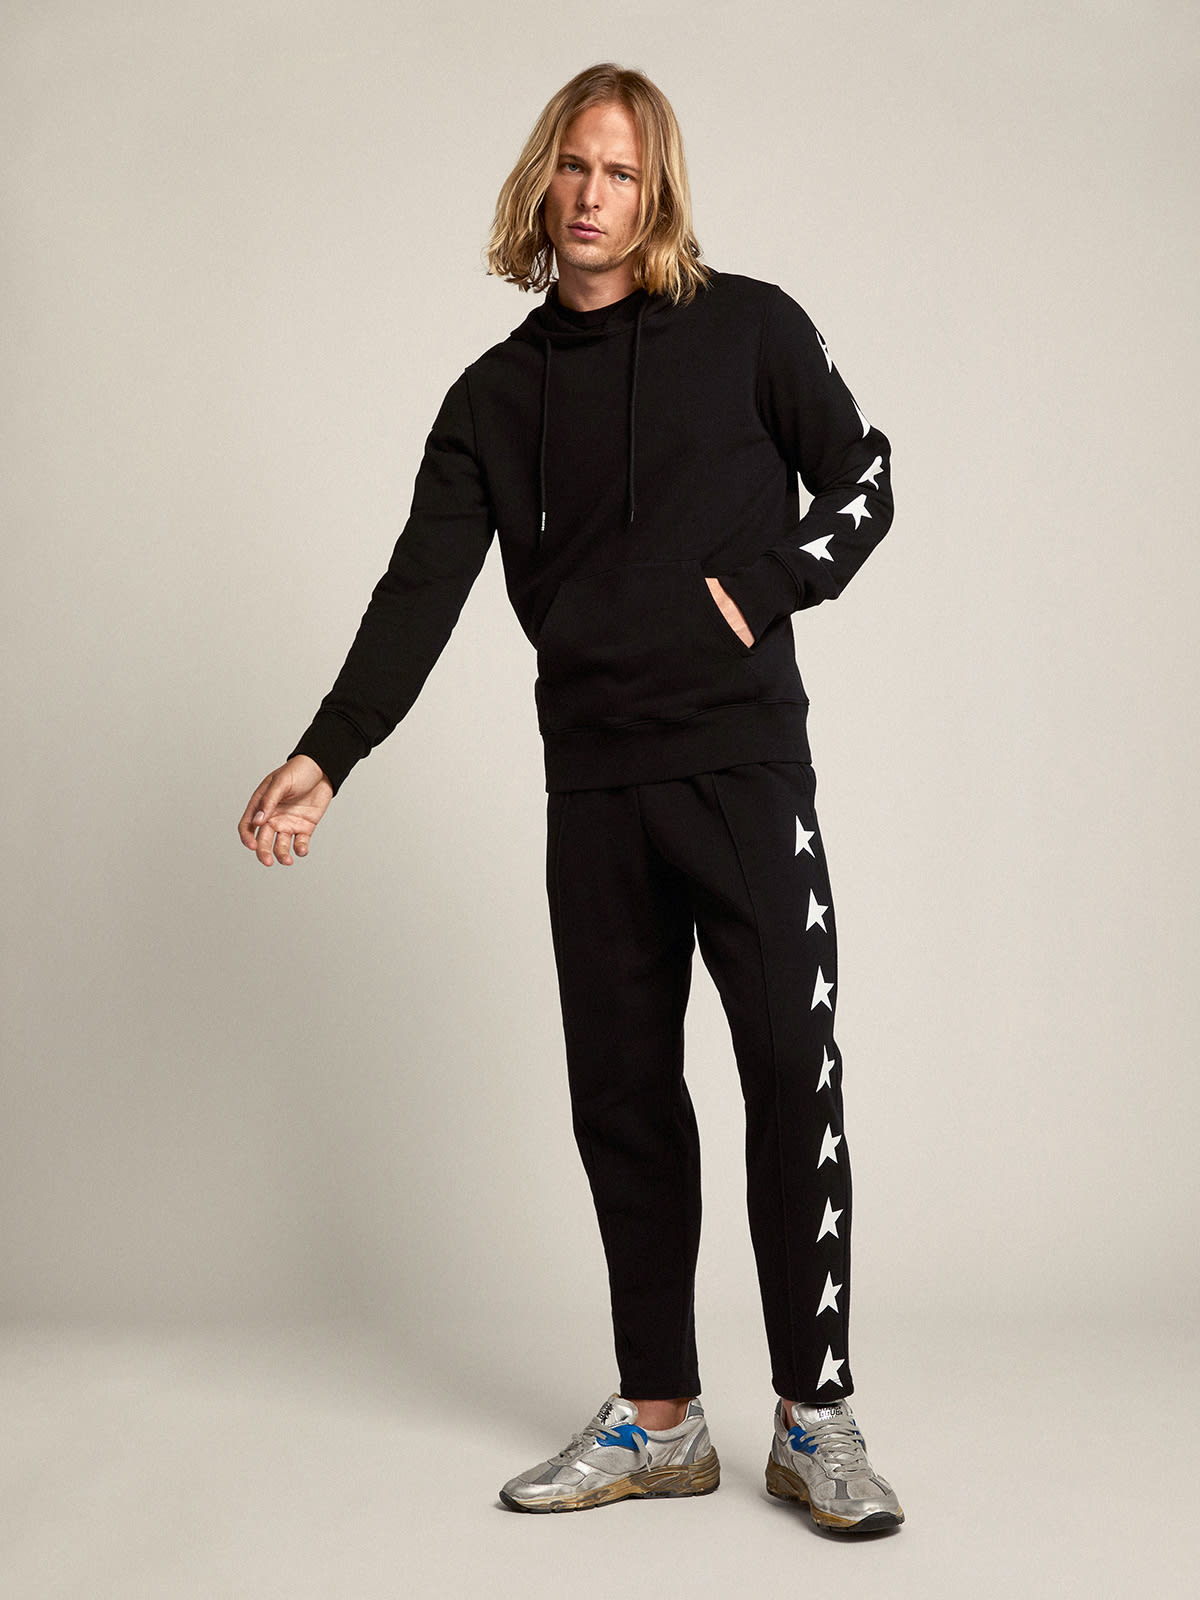 Golden Goose - Men's black joggers with white stars in 